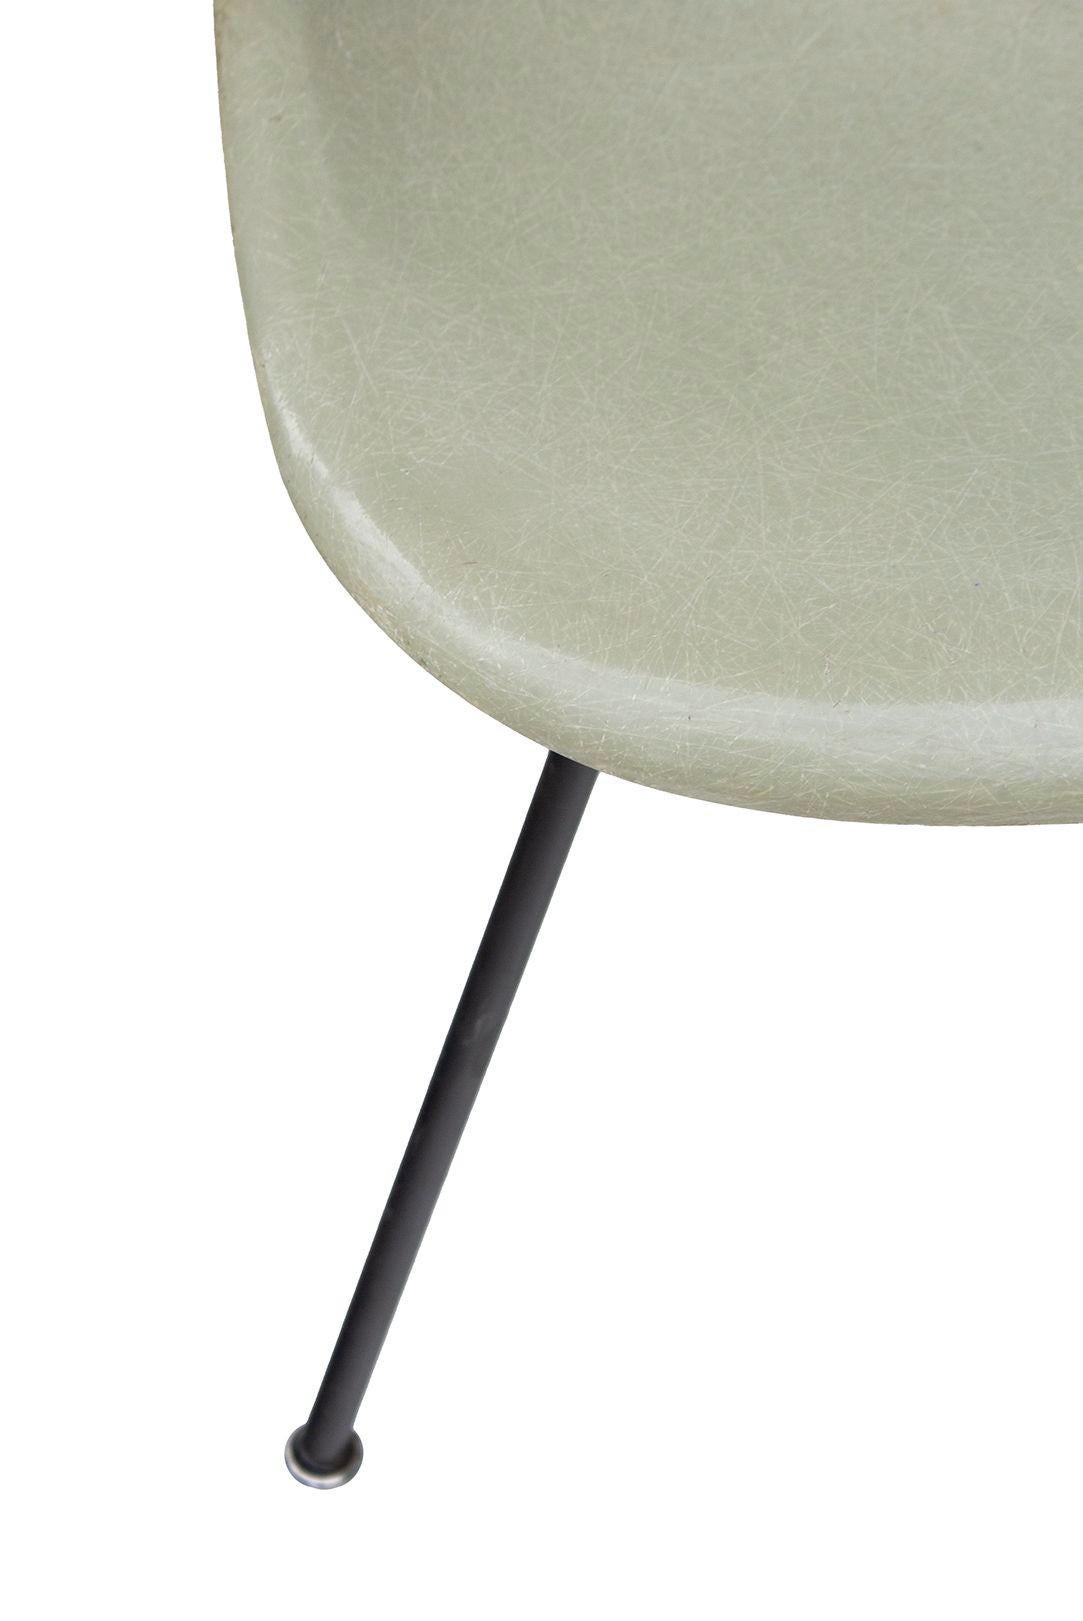 USA, 1950s
Herman Miller Eames Side Shell Chair in Seafoam Light on original black H base. Chair looks to have had a repair to the fiberglass at the side, pictured. Gorgeous color and original mid-century style. Chair will be disassembled to ship